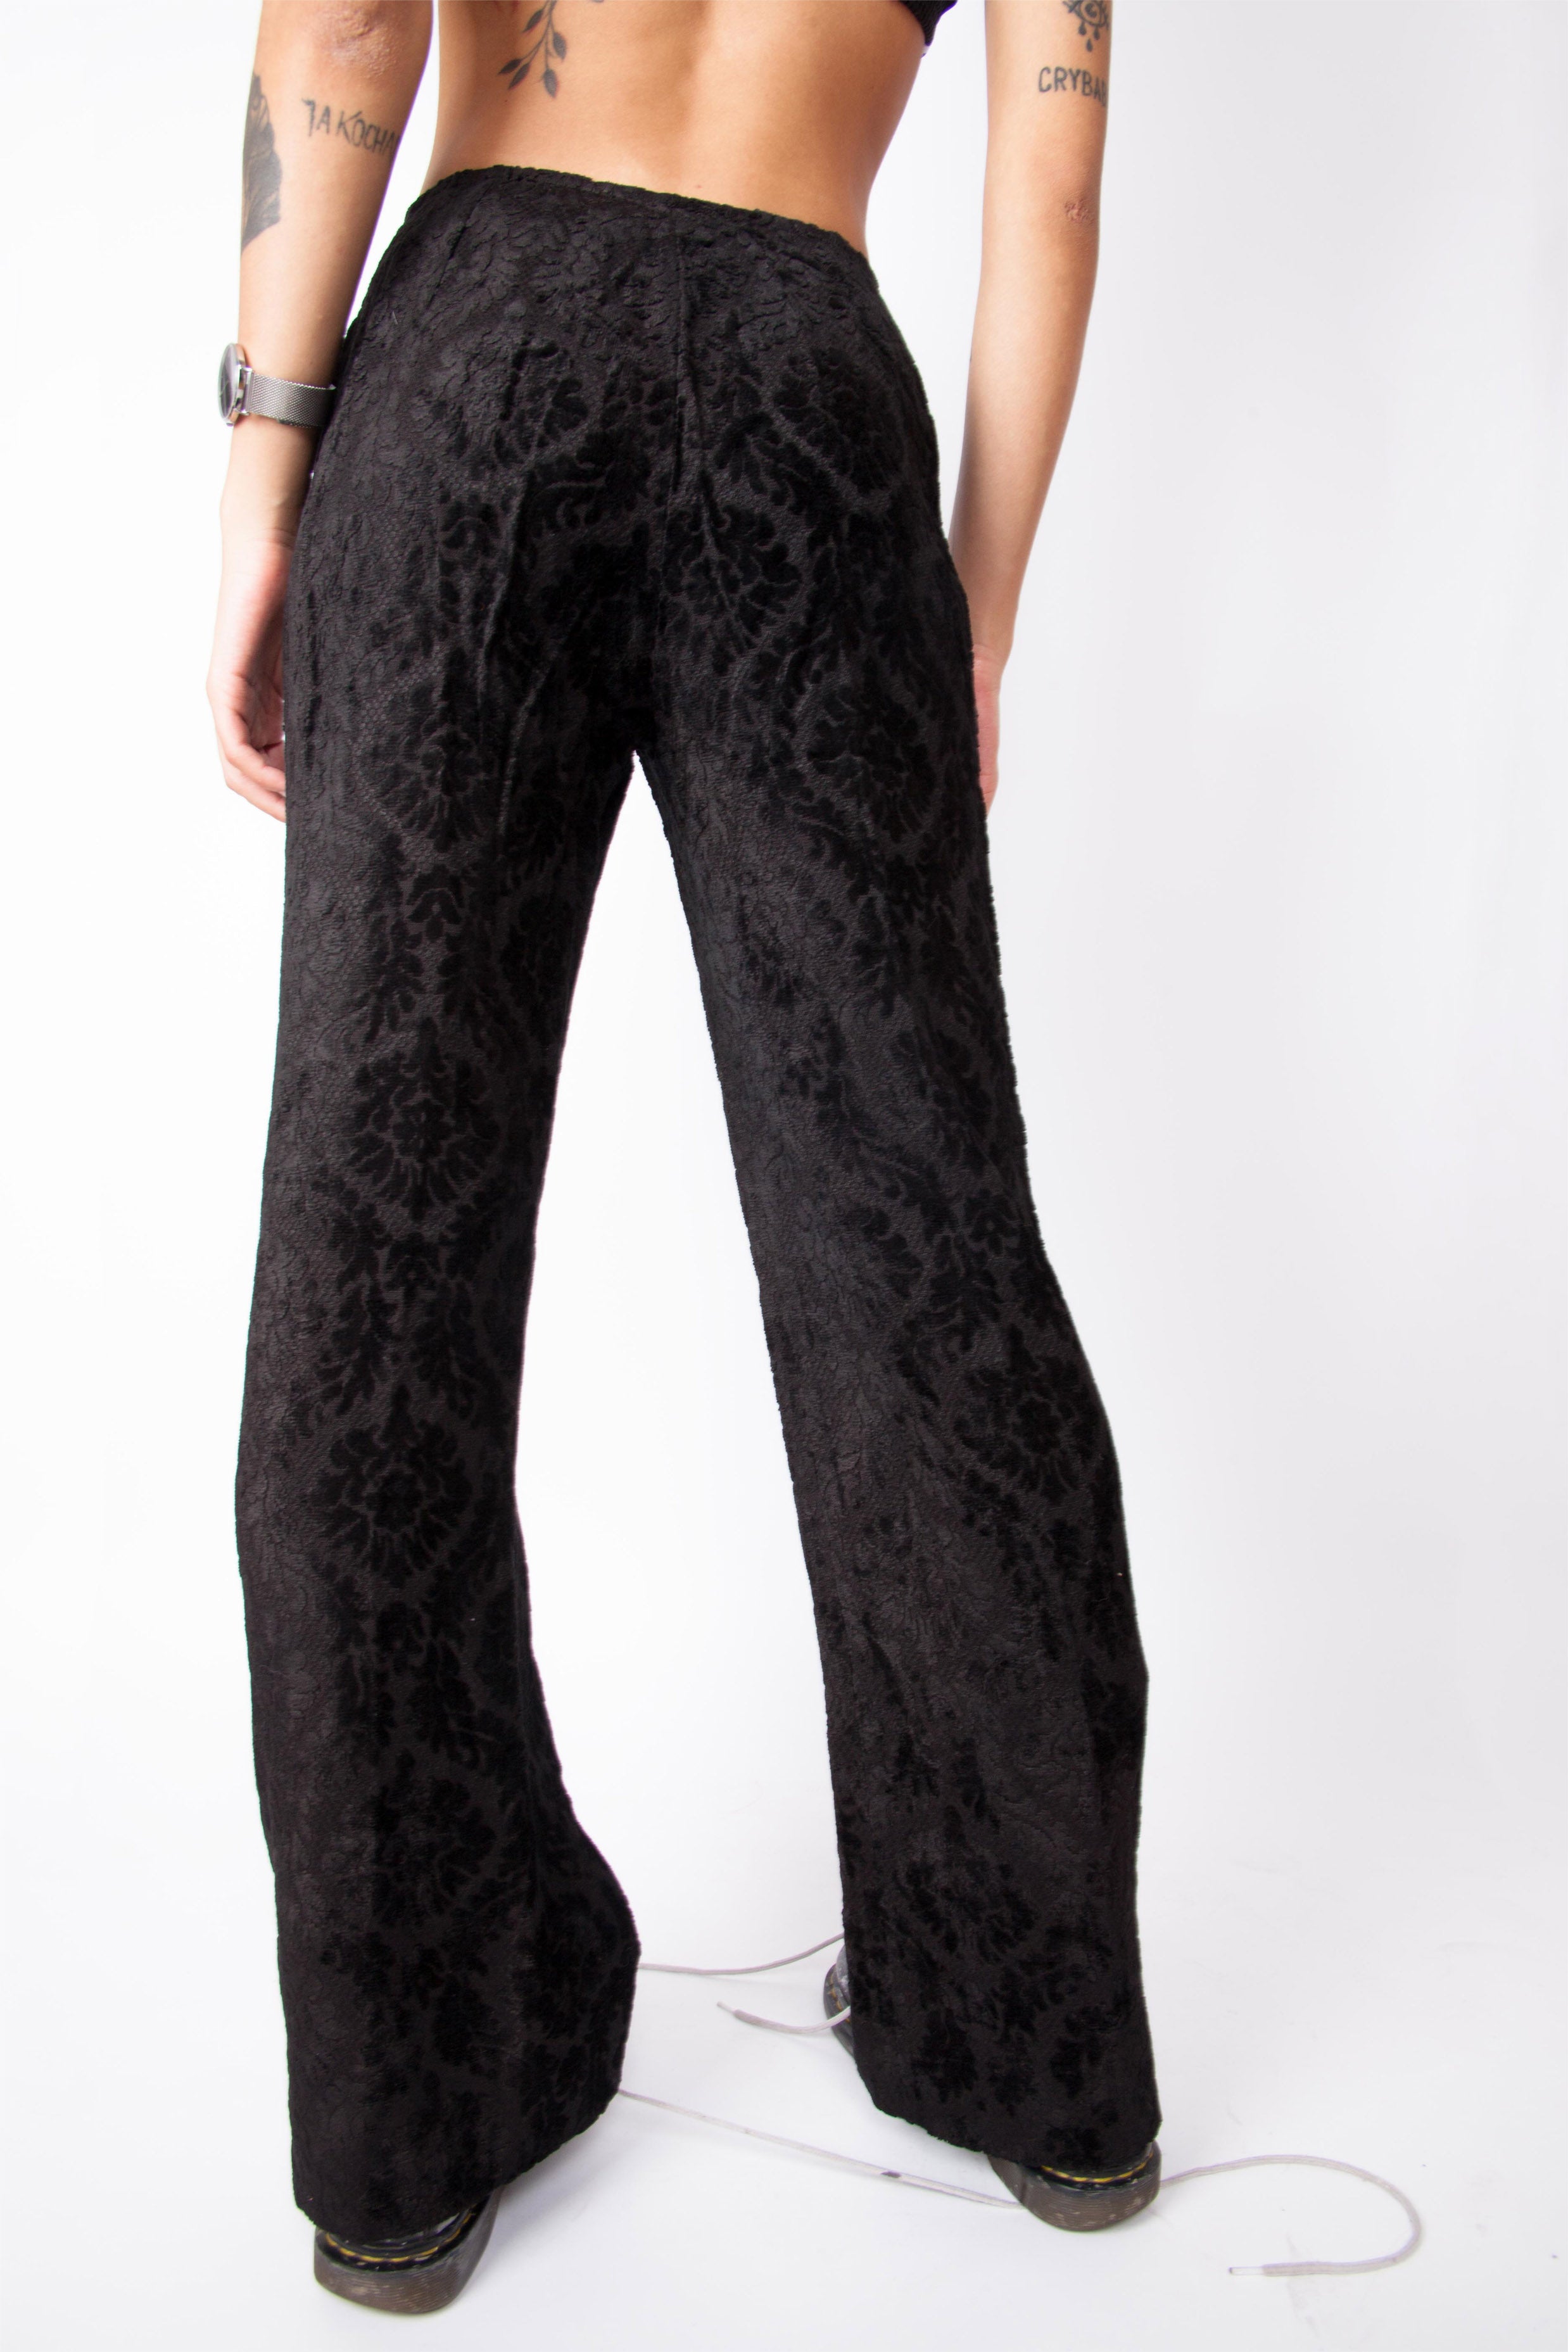 Buy Vintage 90s Lorna Bose' Velvet Trousers, Black, Low-rise, Straight Leg,  Wide Waistband, Soft Fabric, Nineties Occasionwear Online in India - Etsy